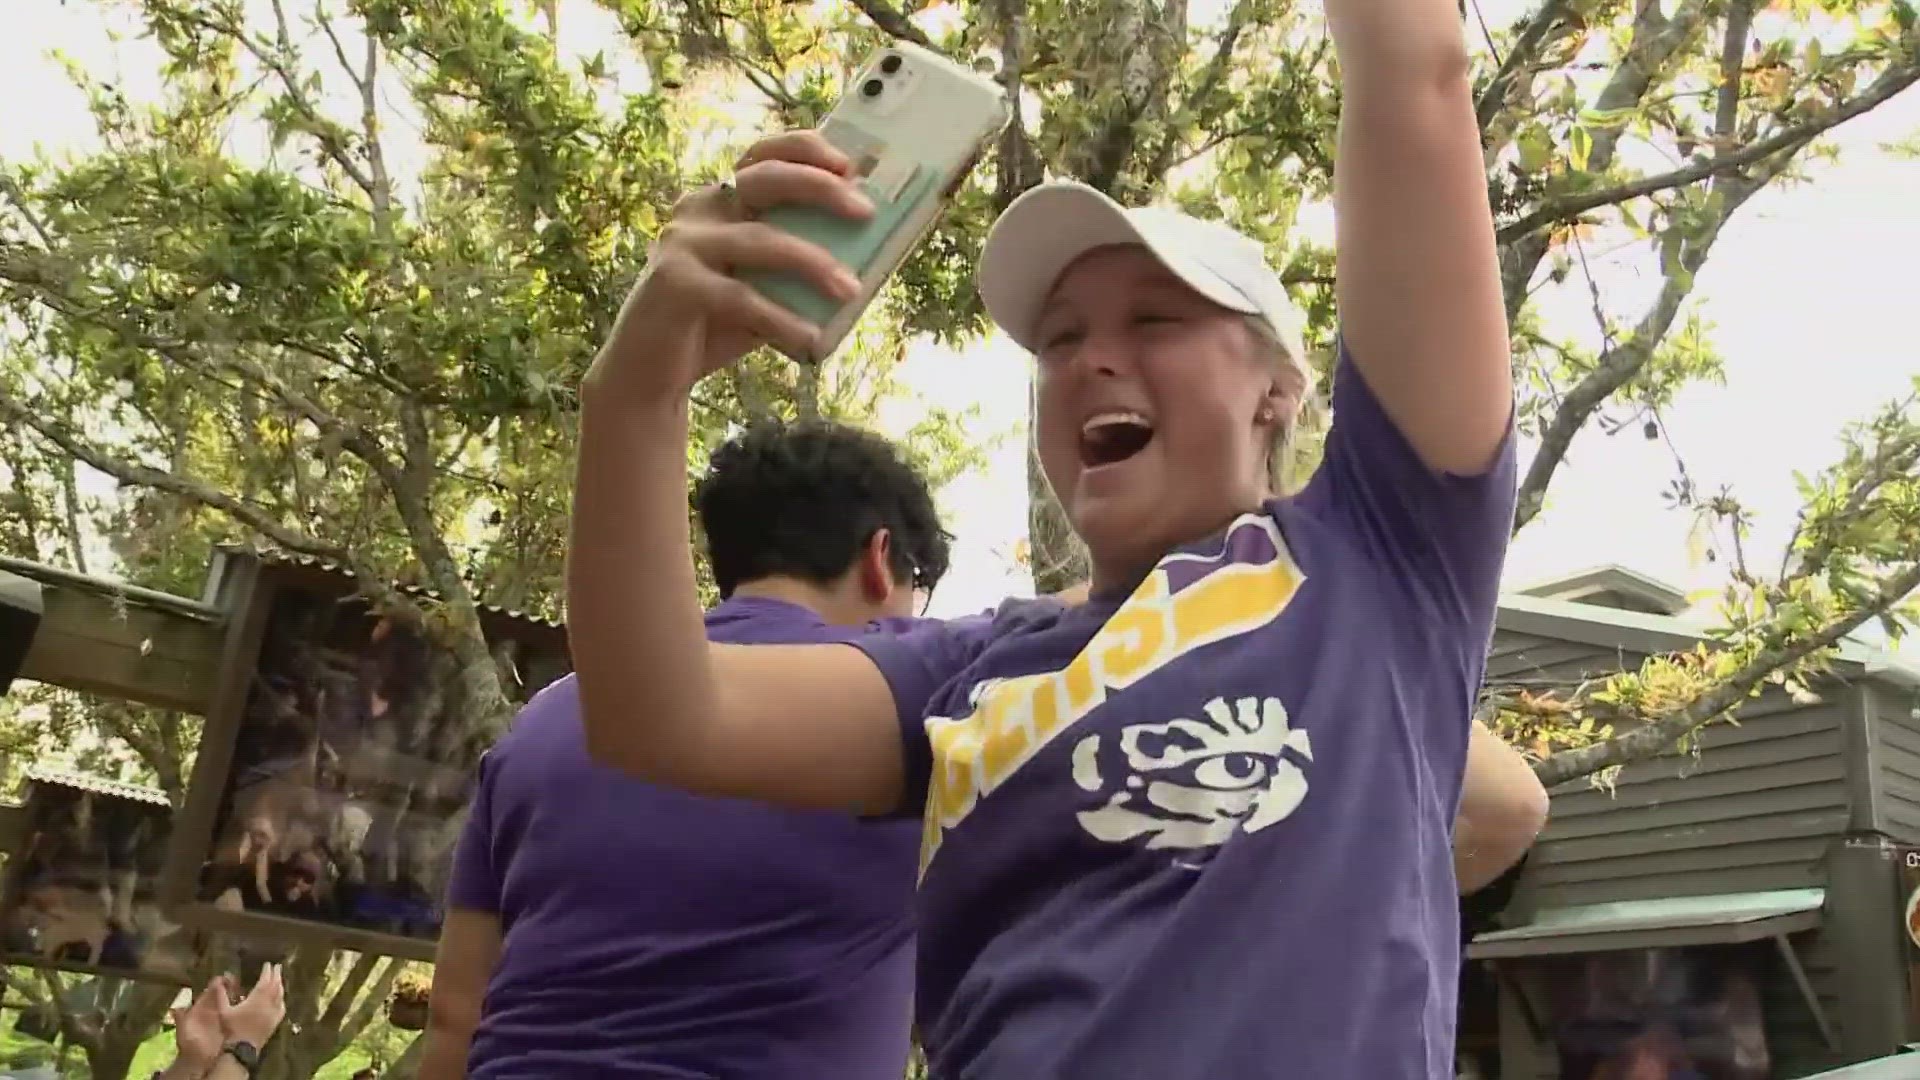 LSU fans at the Wrong Iron bar in New Orleans celebrated the historic win by the Tigers in the women's championship.